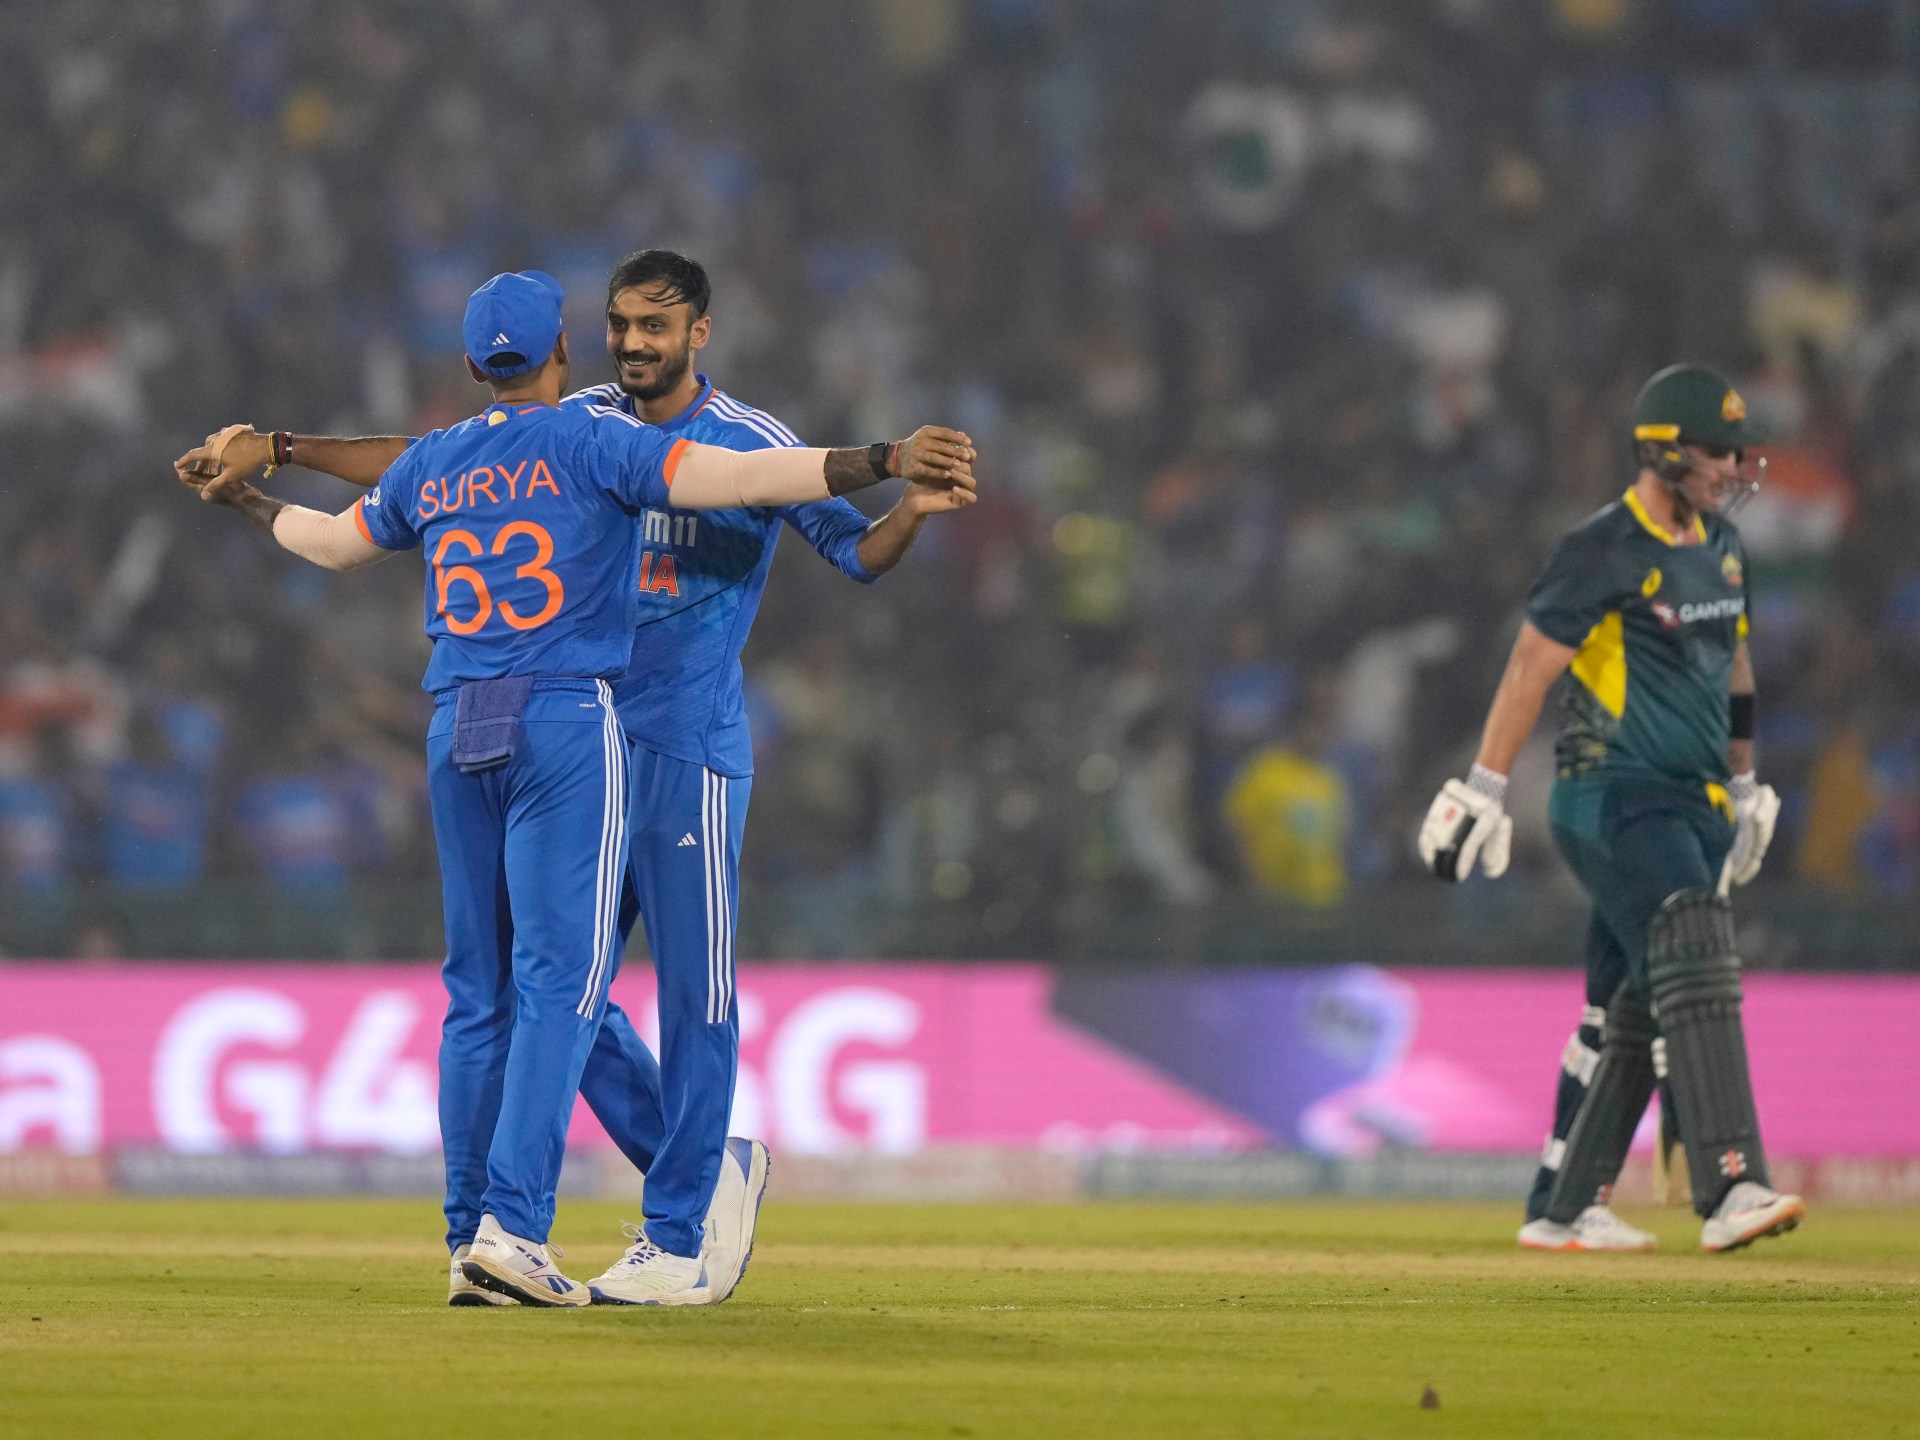 India clinch T20 series against Australia to ease Cricket World Cup pain | Cricket News #India #clinch #T20 #series #Australia #ease #Cricket #World #Cup #pain #Cricket #News